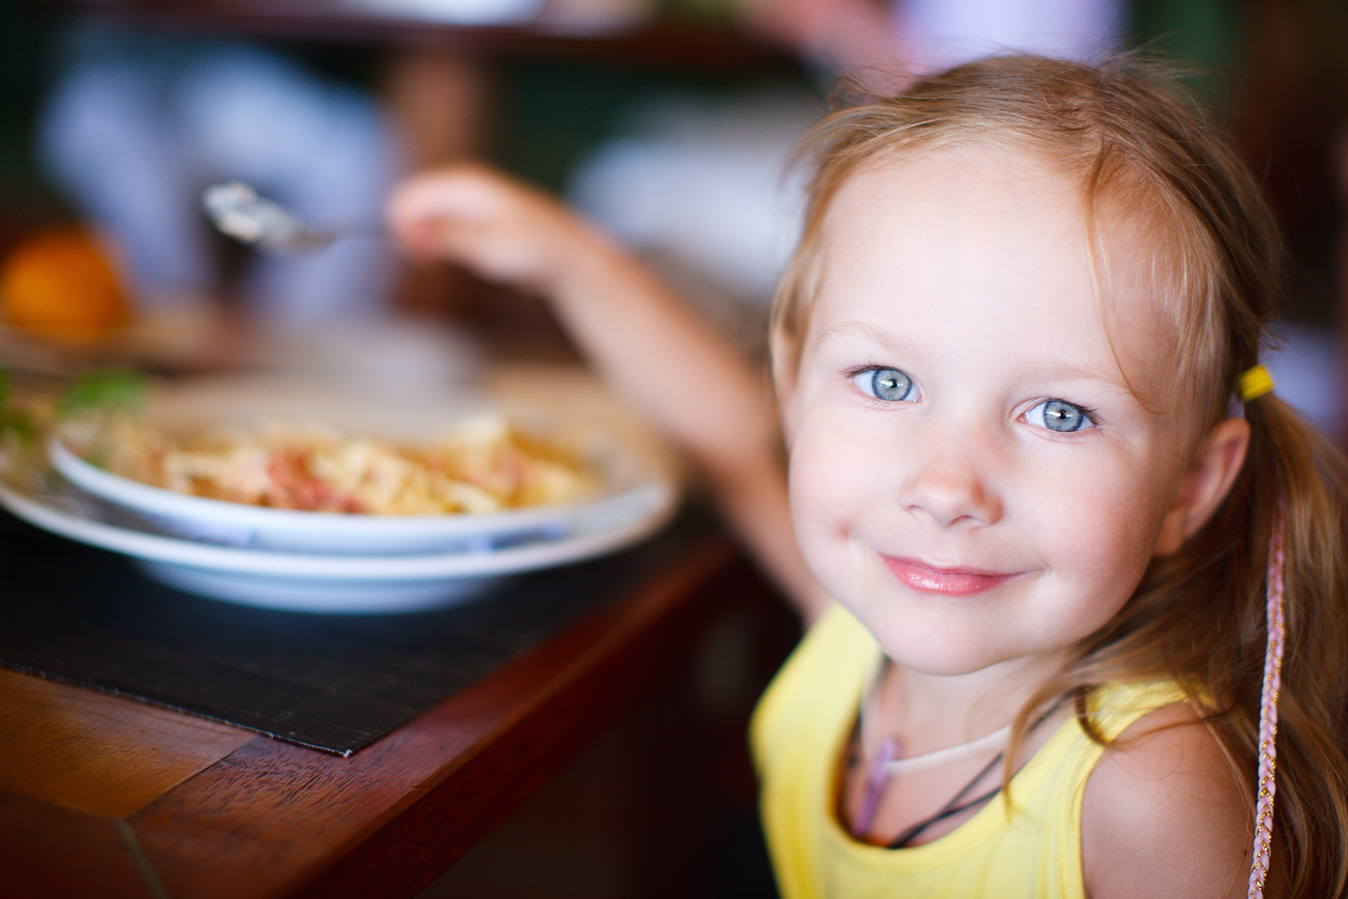 photo of a young girl eating, food provided by a loving parent who the court has determined would be in the best interests of the child to support and take care of her